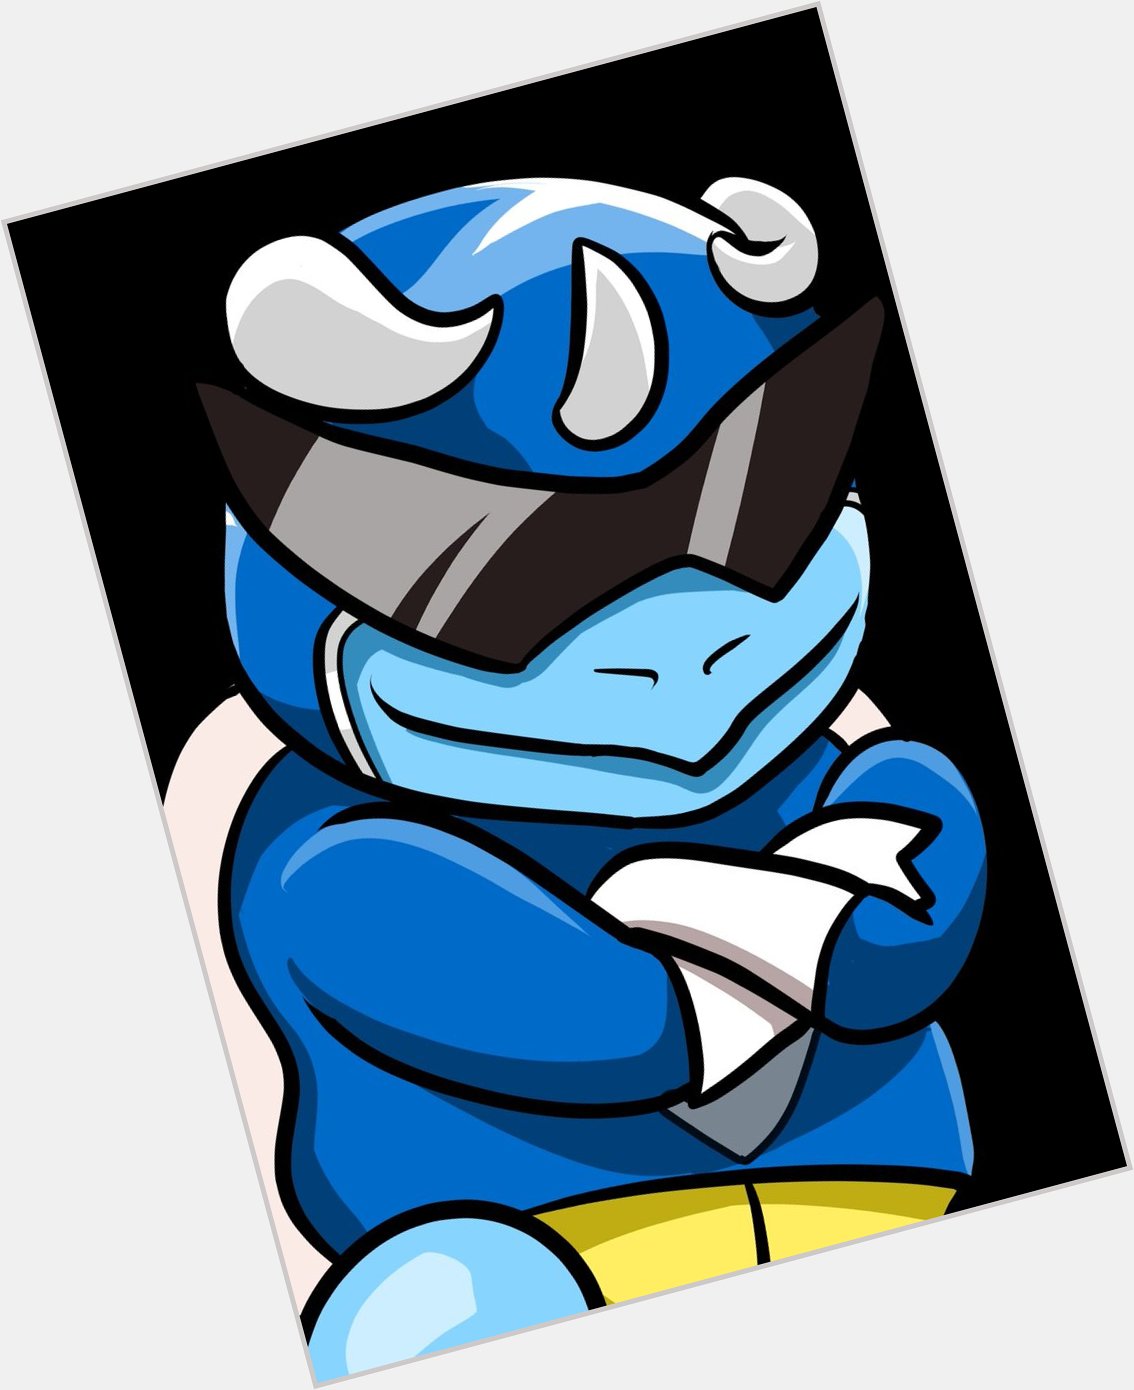 Happy Belated Birthday ! Thank you again for letting Squirtle borrow the Blue Ranger Suit! 